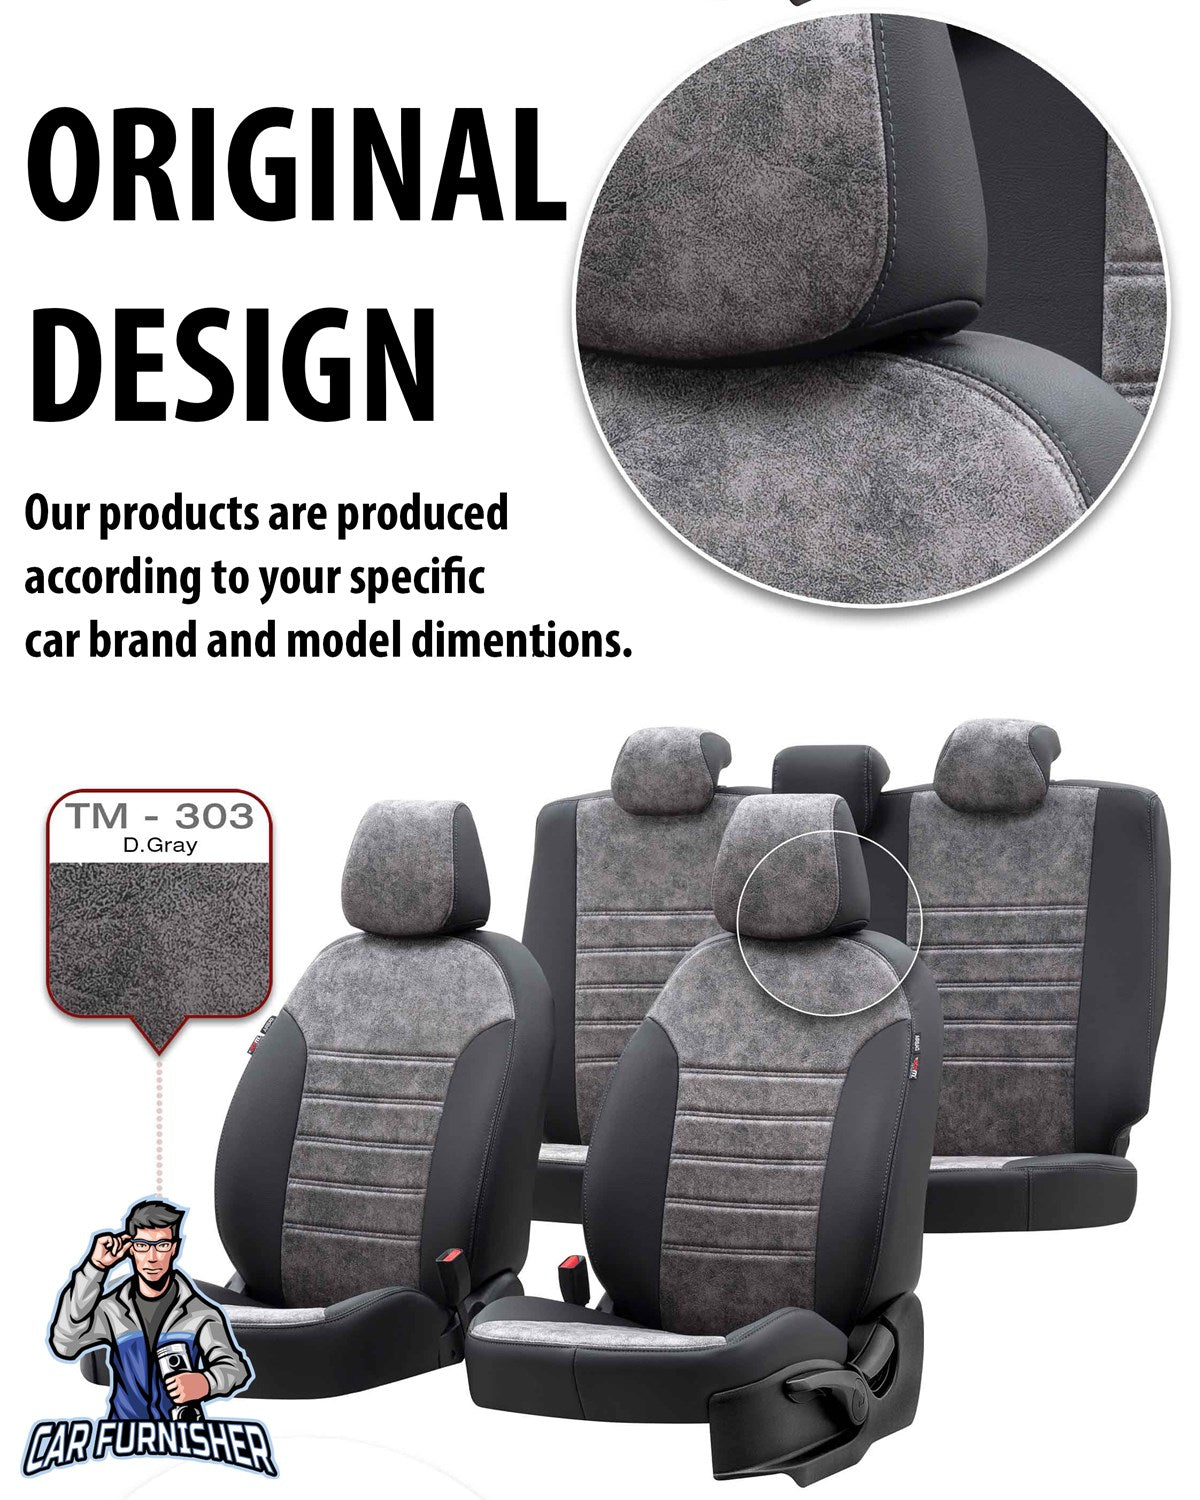 Bmw 5 Series Seat Cover Milano Suede Design Burgundy Leather & Suede Fabric